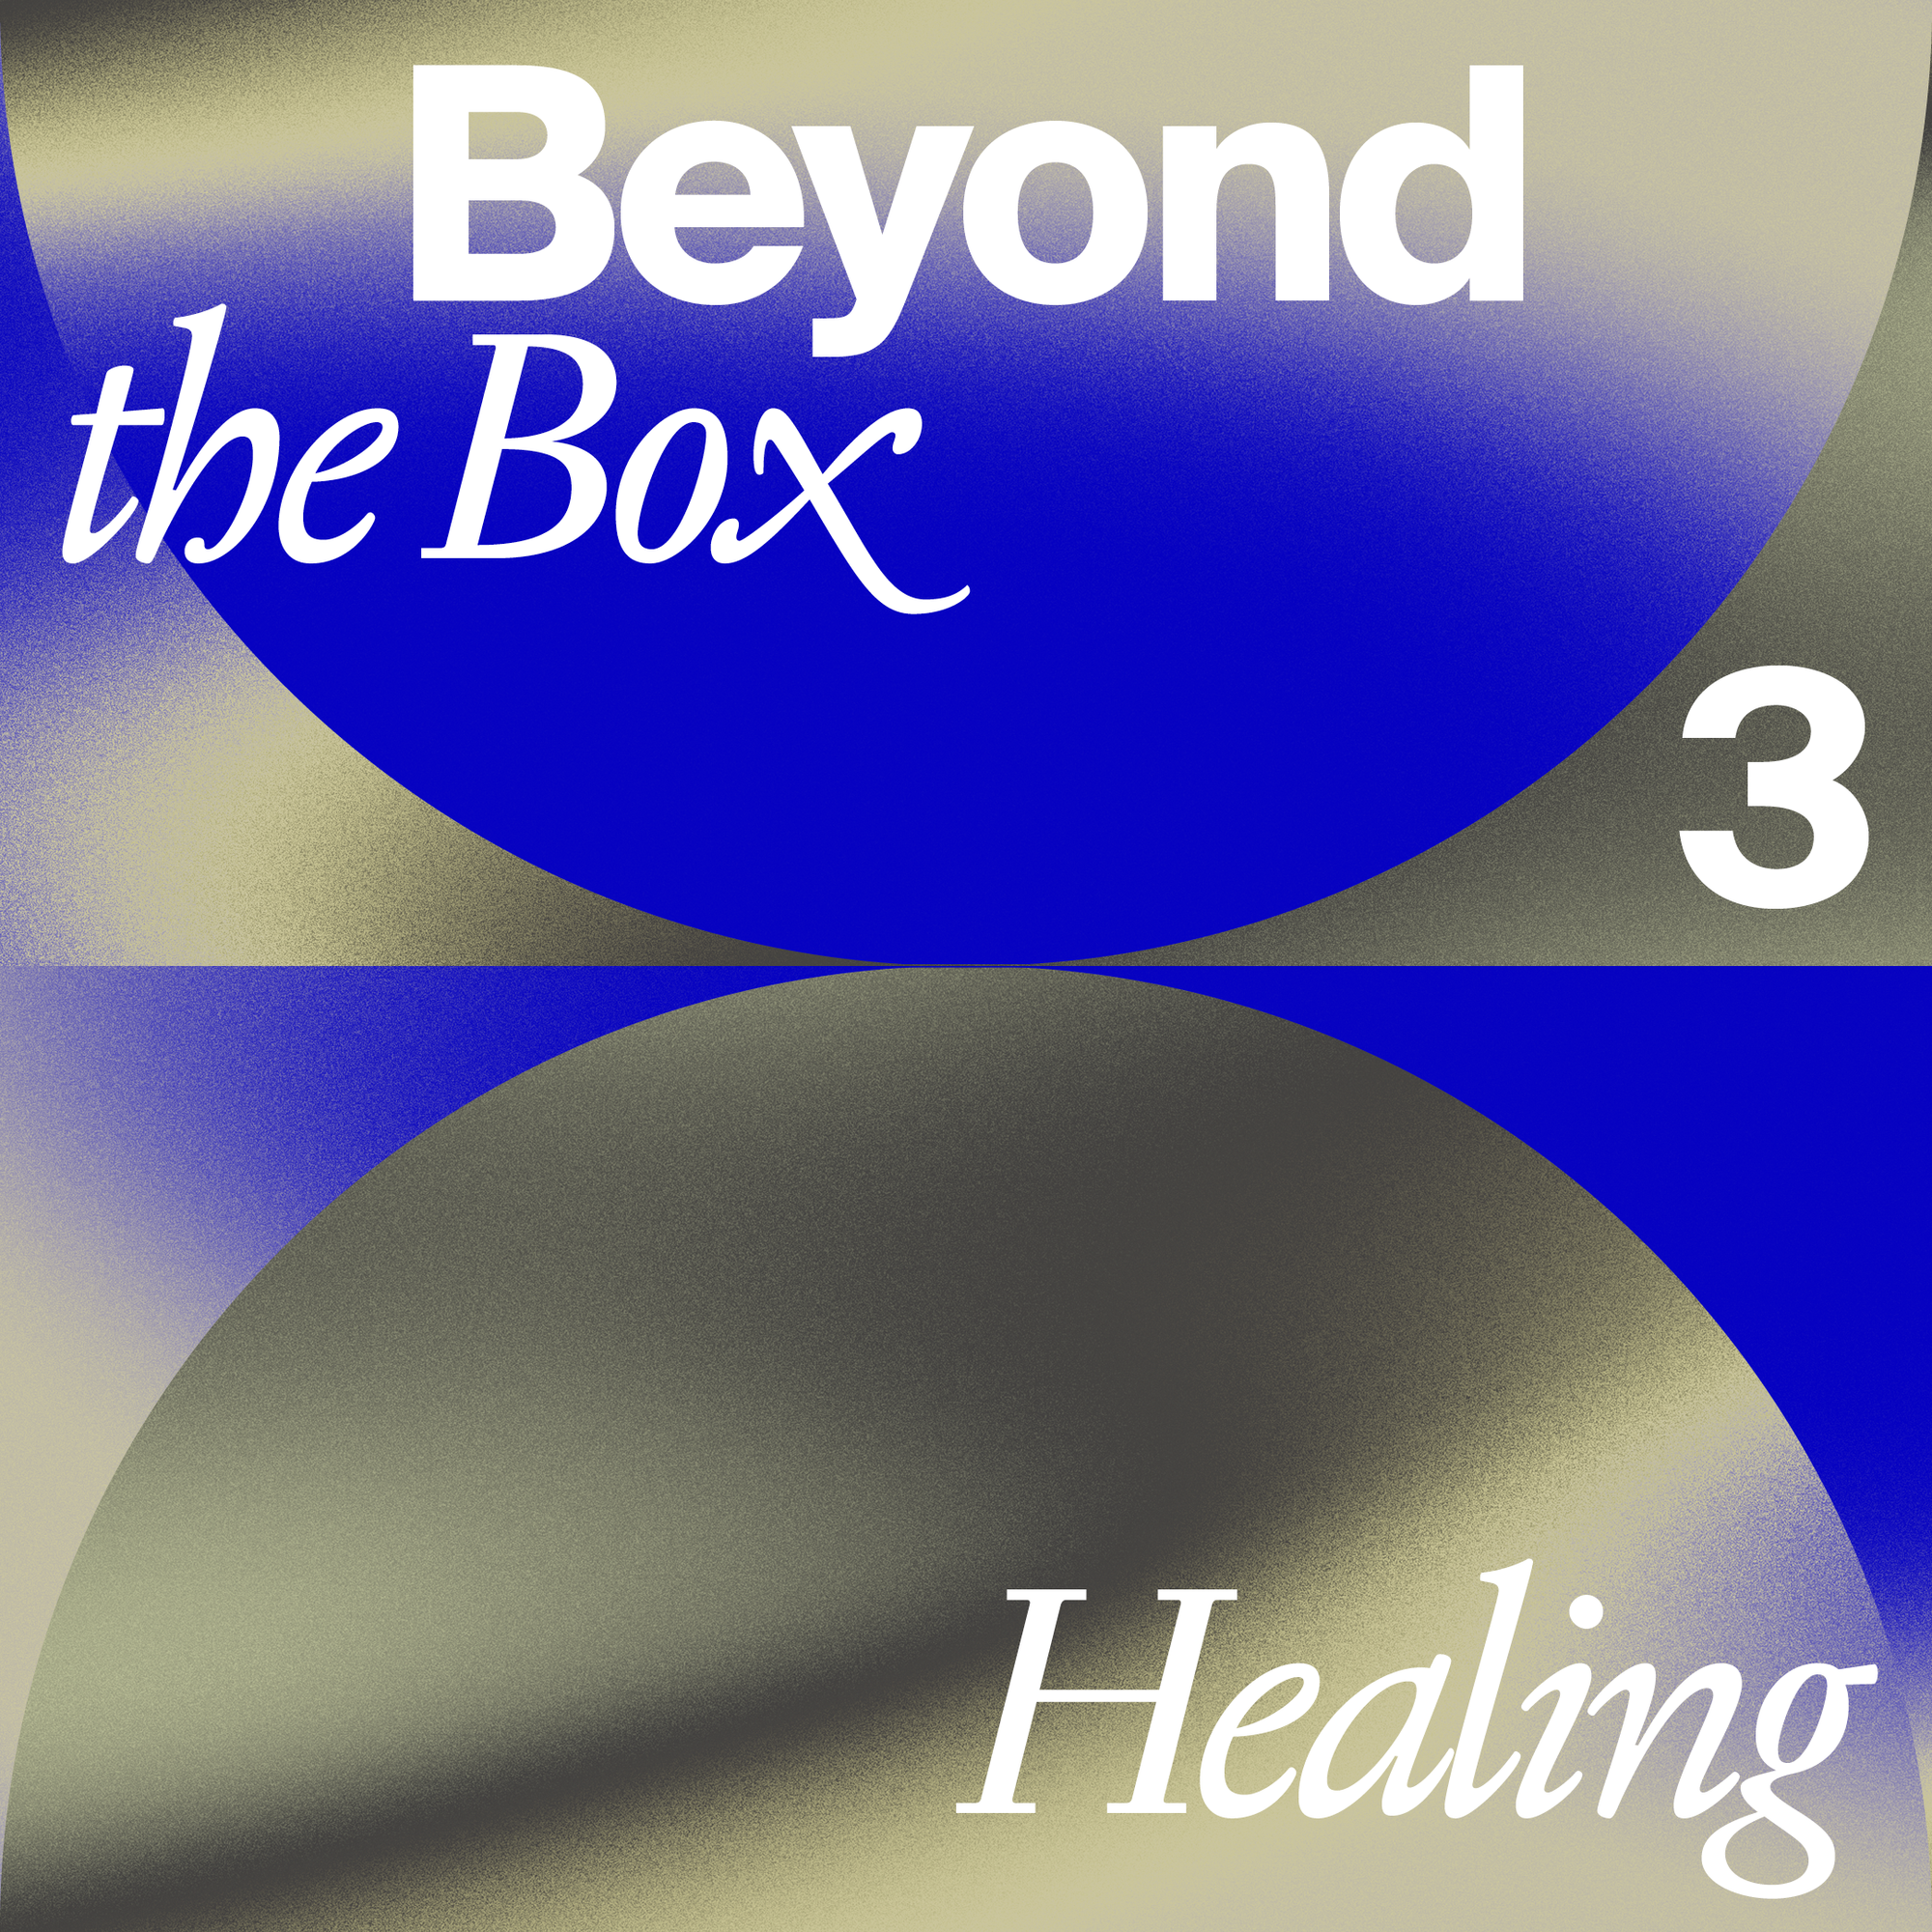 For Freedoms: Beyond The Box 3 (HEALING through Community Collaboration) at Pioneer Works